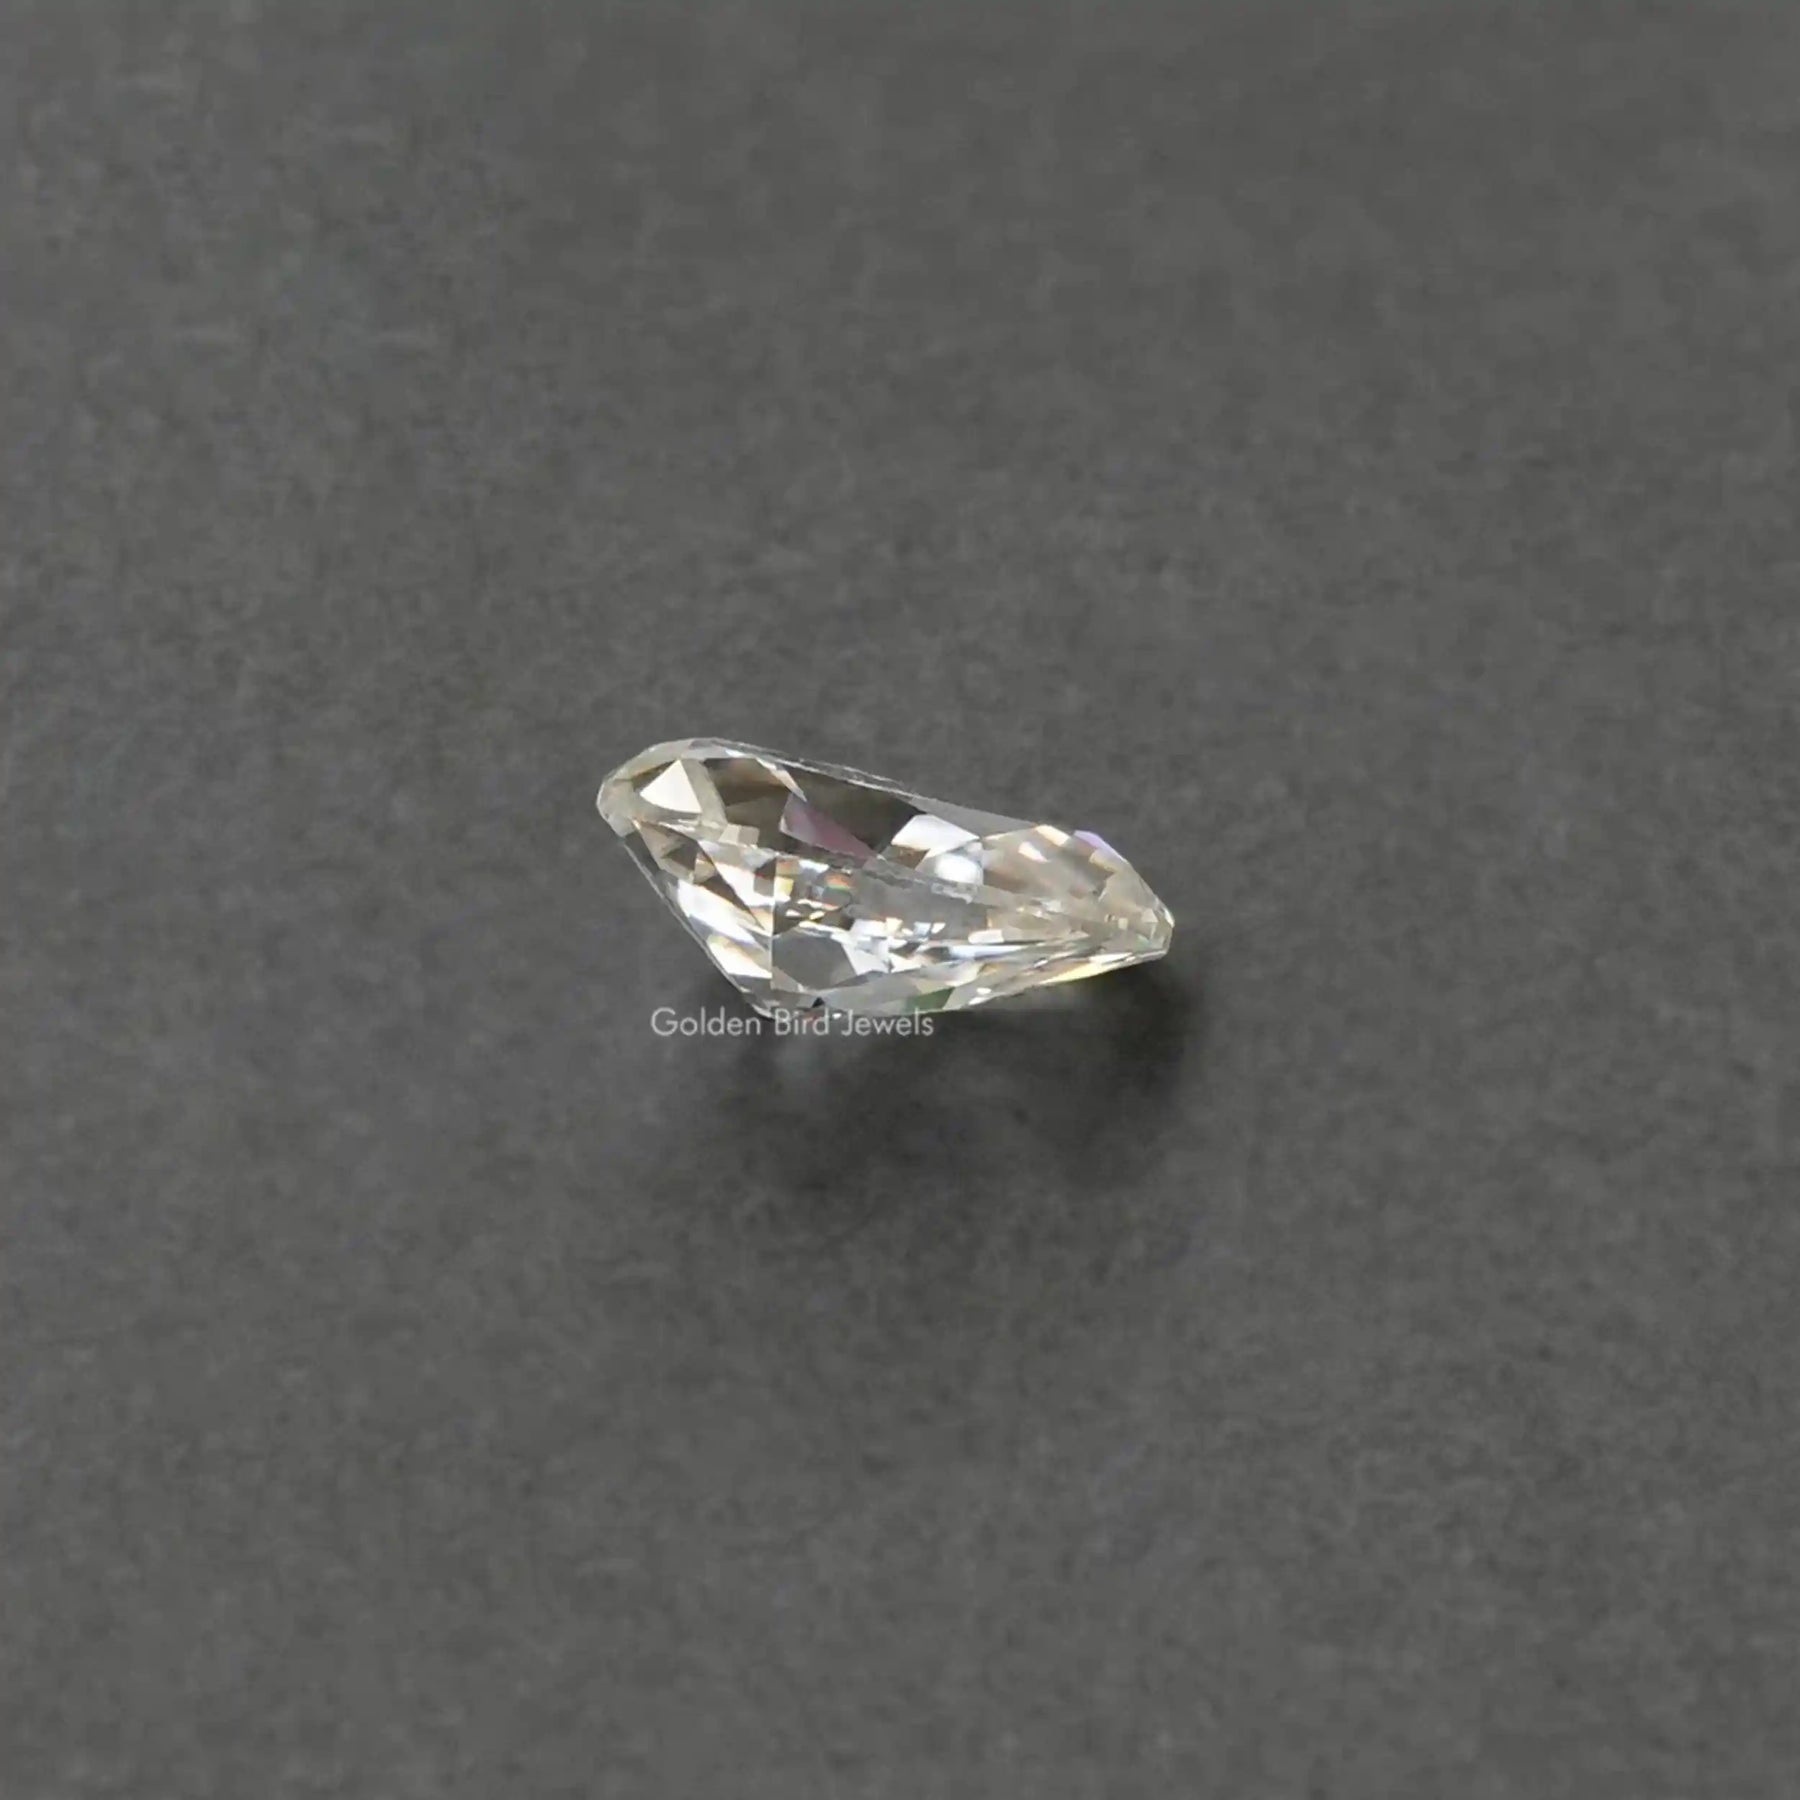 [Side view of moissanitee pear shaped loose stone made of VVS clarity]-[Golden Bird Jewels]